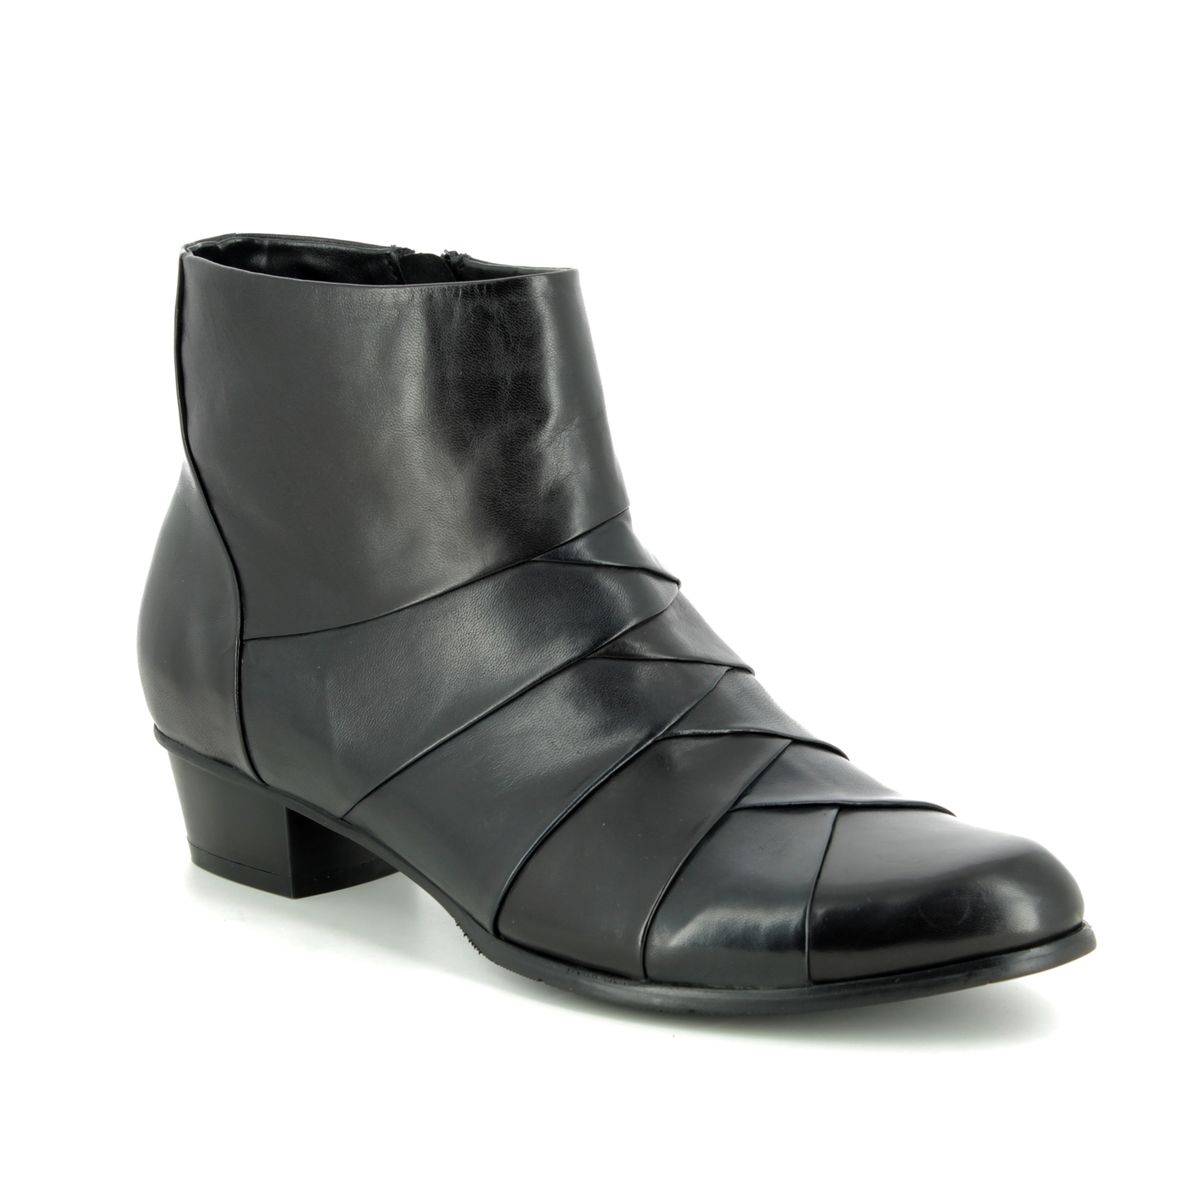 Regarde Le Ciel Stefany 172 Black Navy Womens Boots 9118-30 Ankle Boots In Soft Black Navy Leather In Size 41